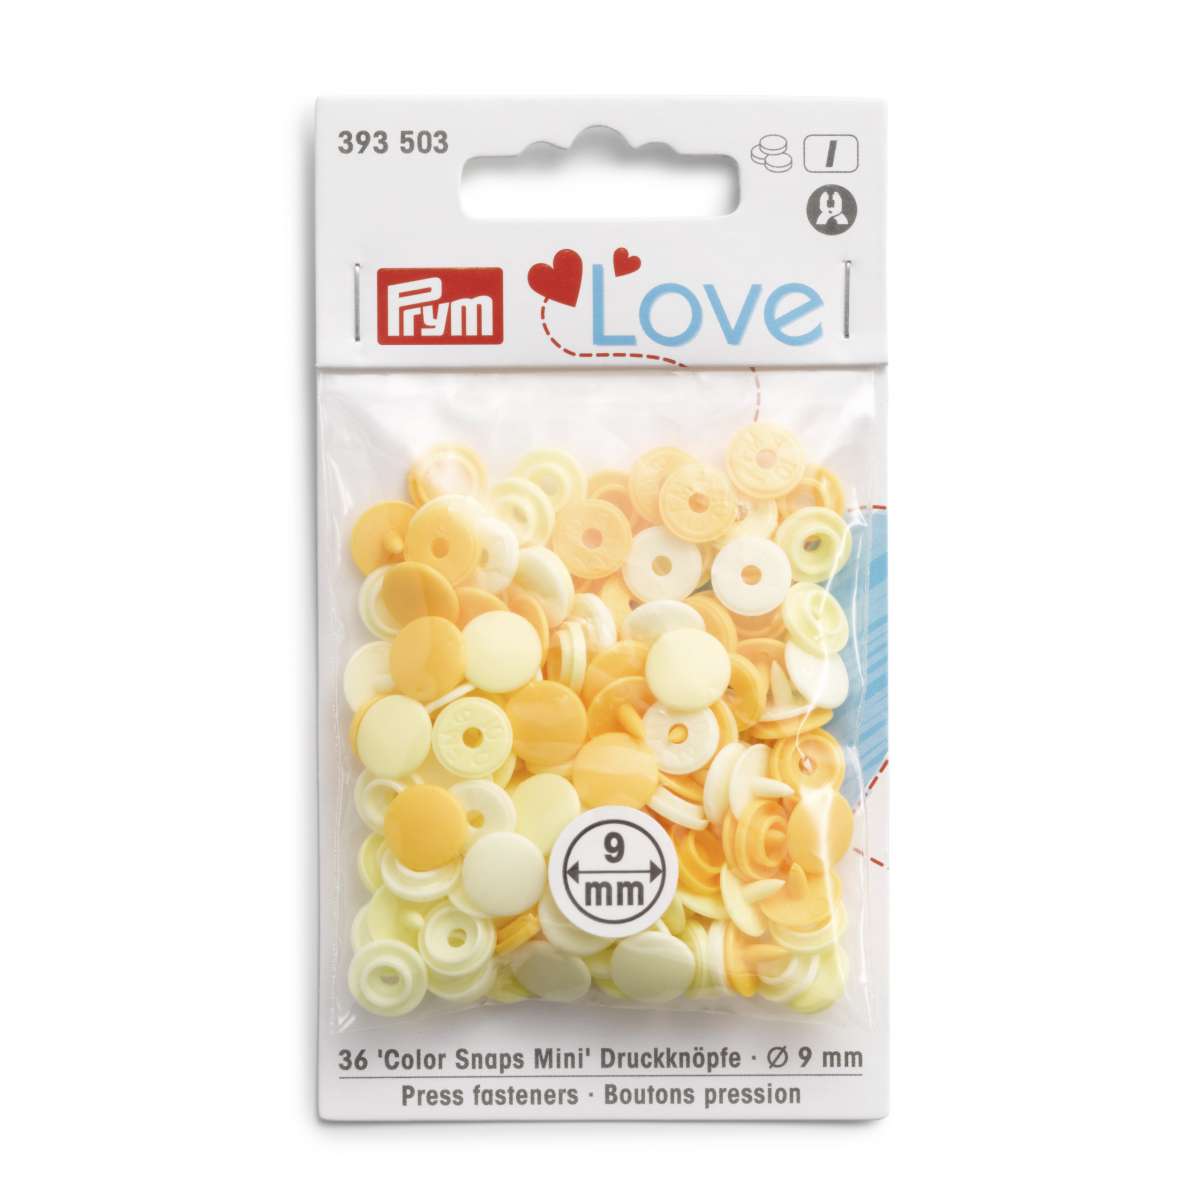 Prym Love Press fasteners Colour Snaps Mini, 9 mm, in shades of pale yellow